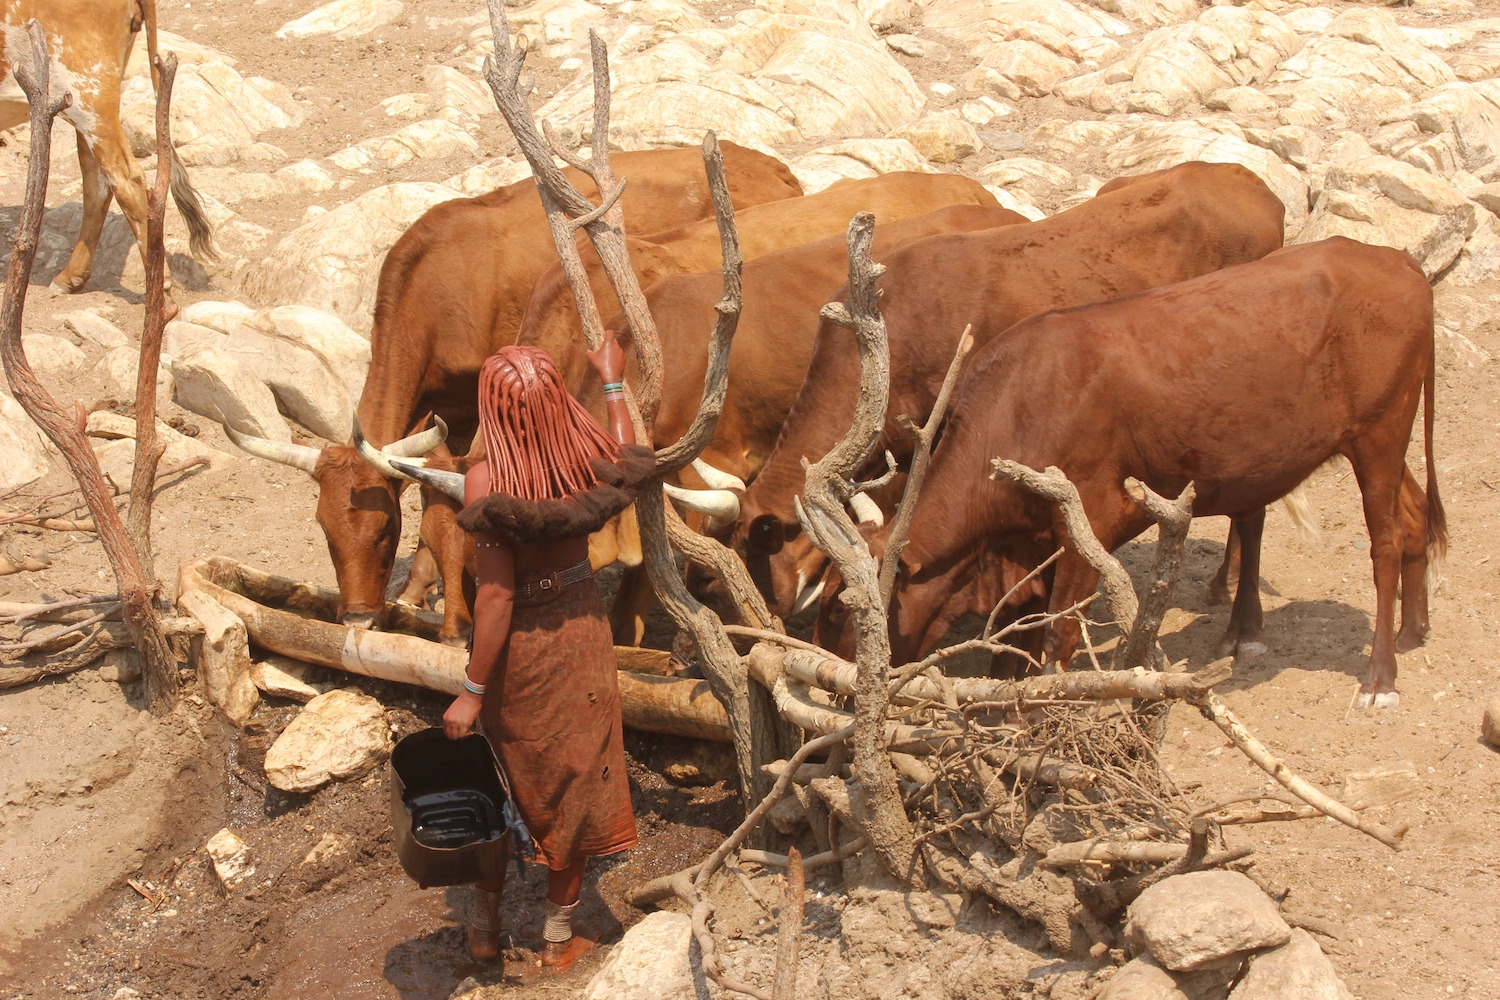 A Himba woman and some cattle.